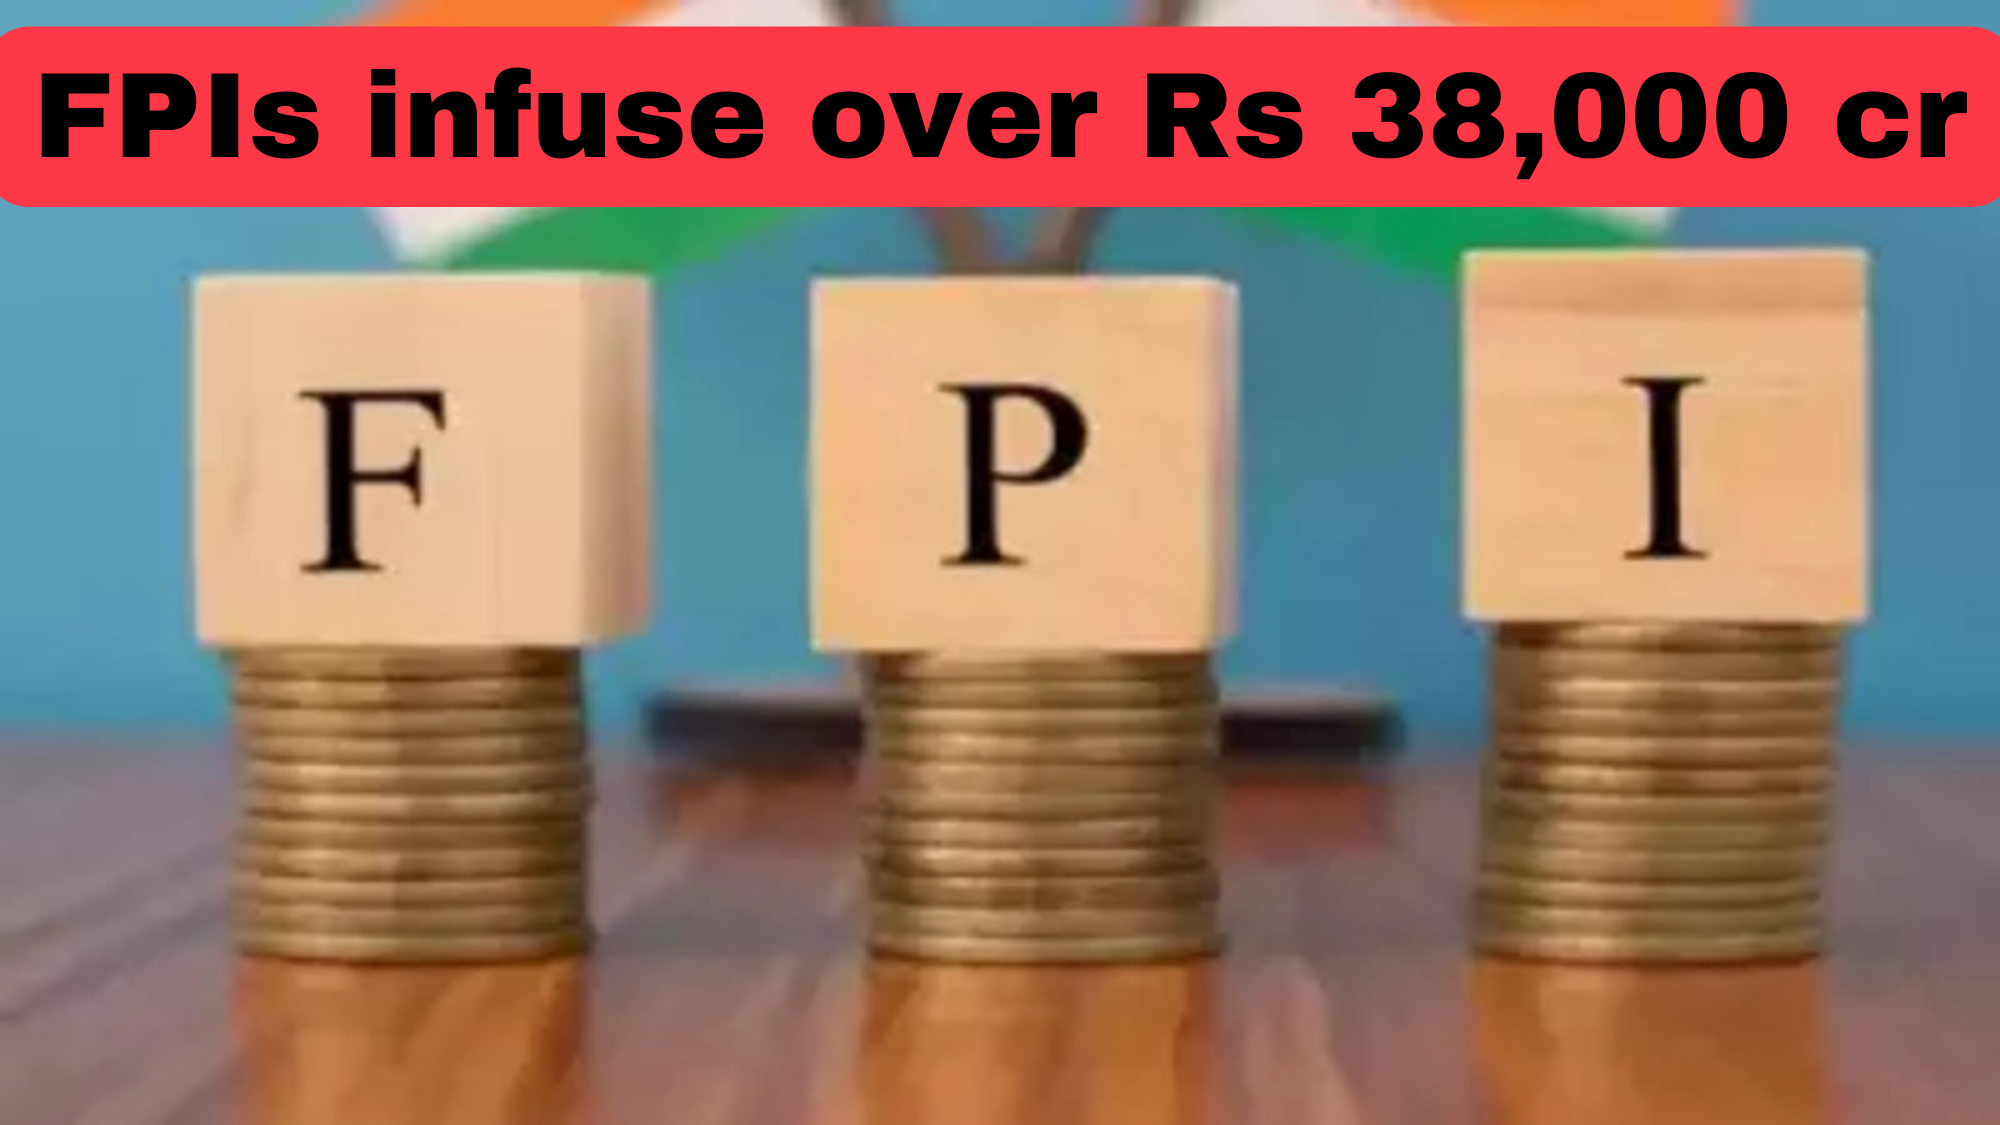 Reason For Foreign Portfolio Investors (FPIs) Is Investing Over Rs 38,000 Cr In Indian Market?